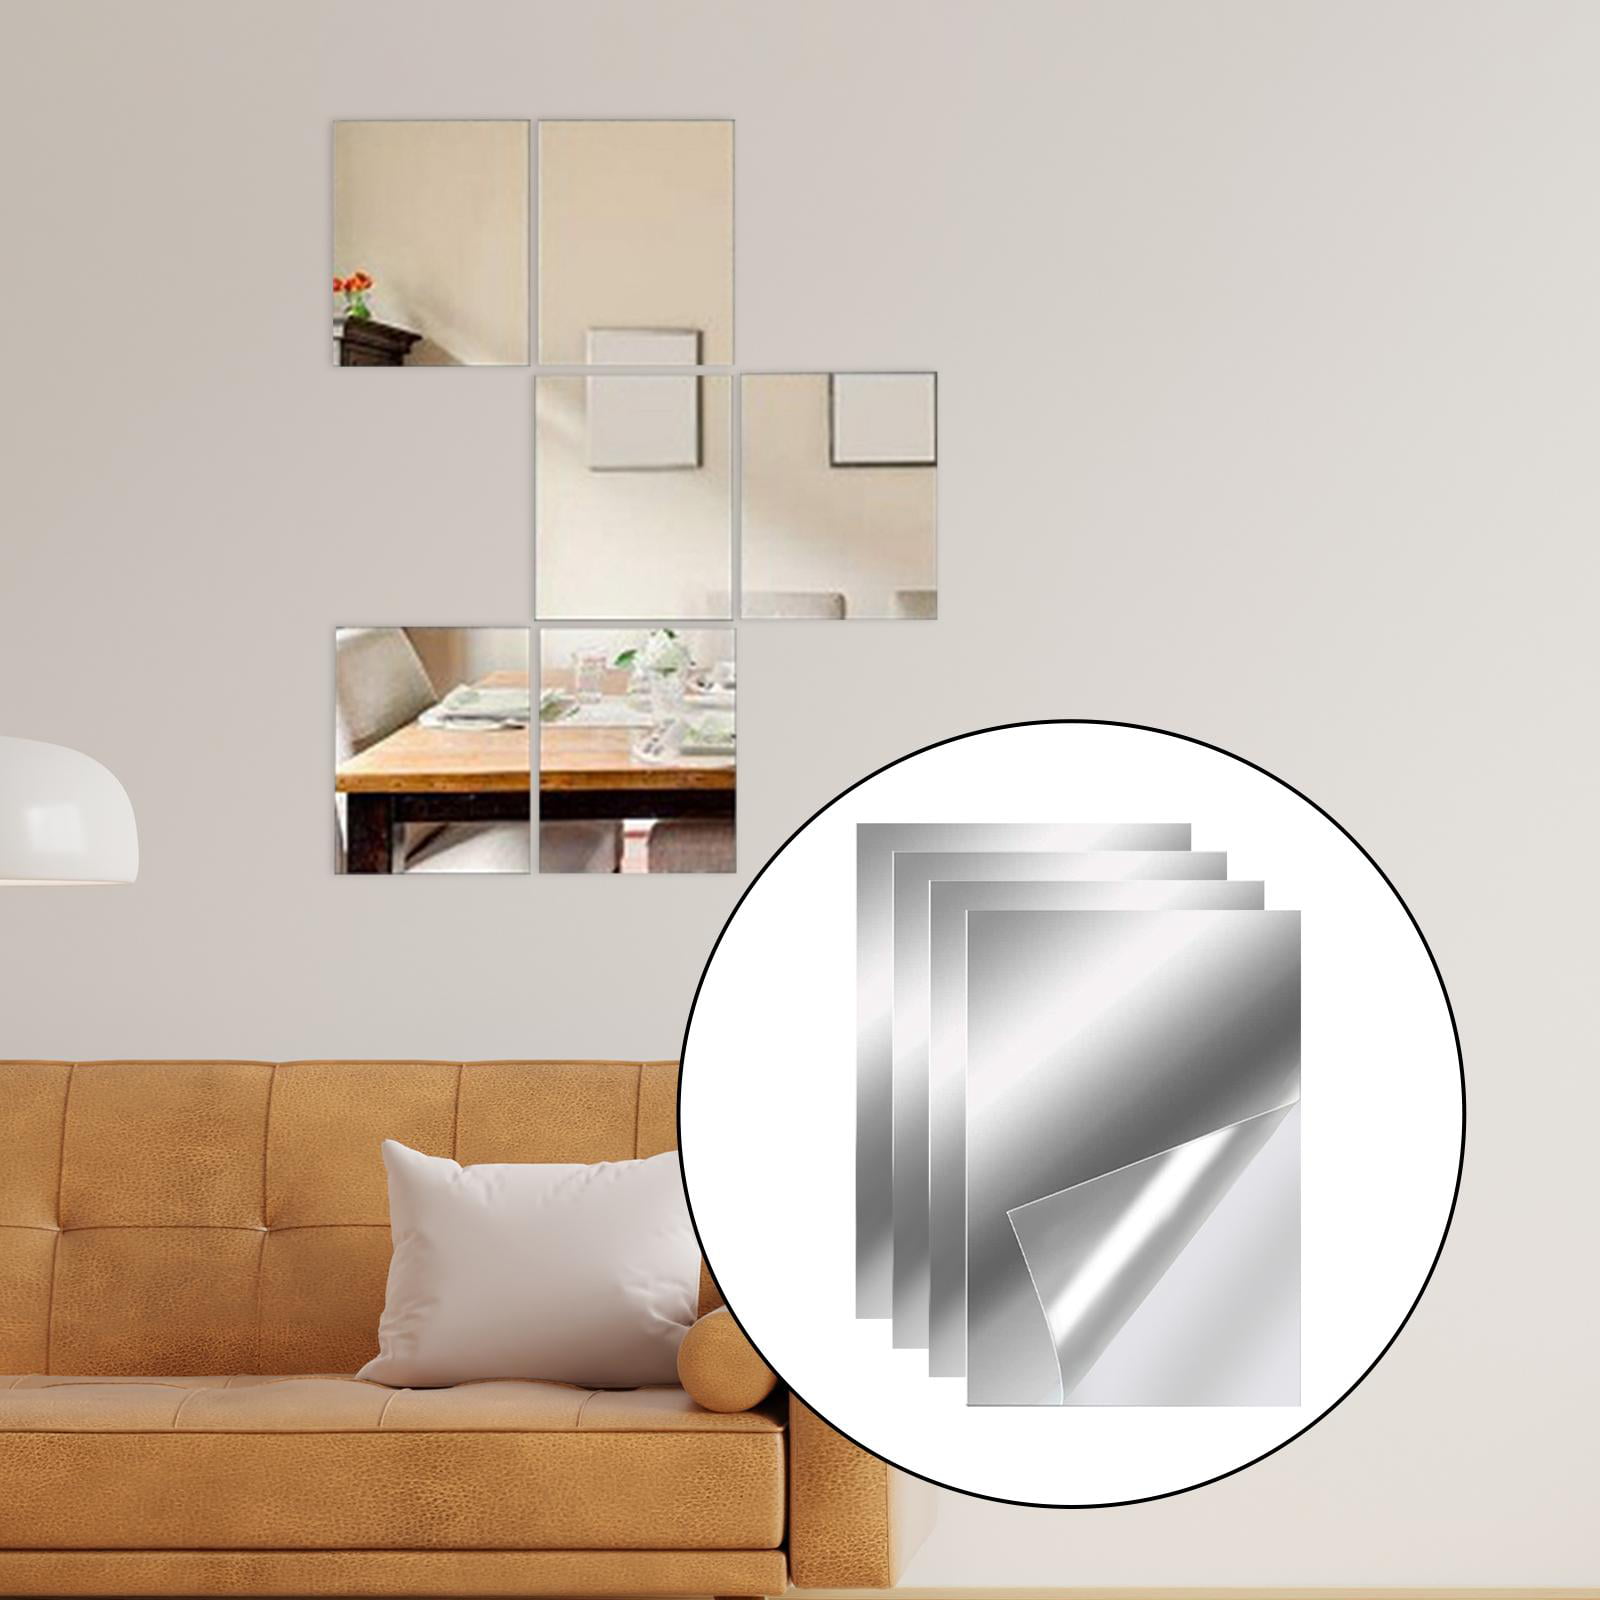 4Pcs Acrylic Mirror Sheet Self Adhesive Wall Mounted Home Décor Non Glass  Sticky Mirror Tile Square 8x8 inch Flexible Mirror Sheets for Wall Decor